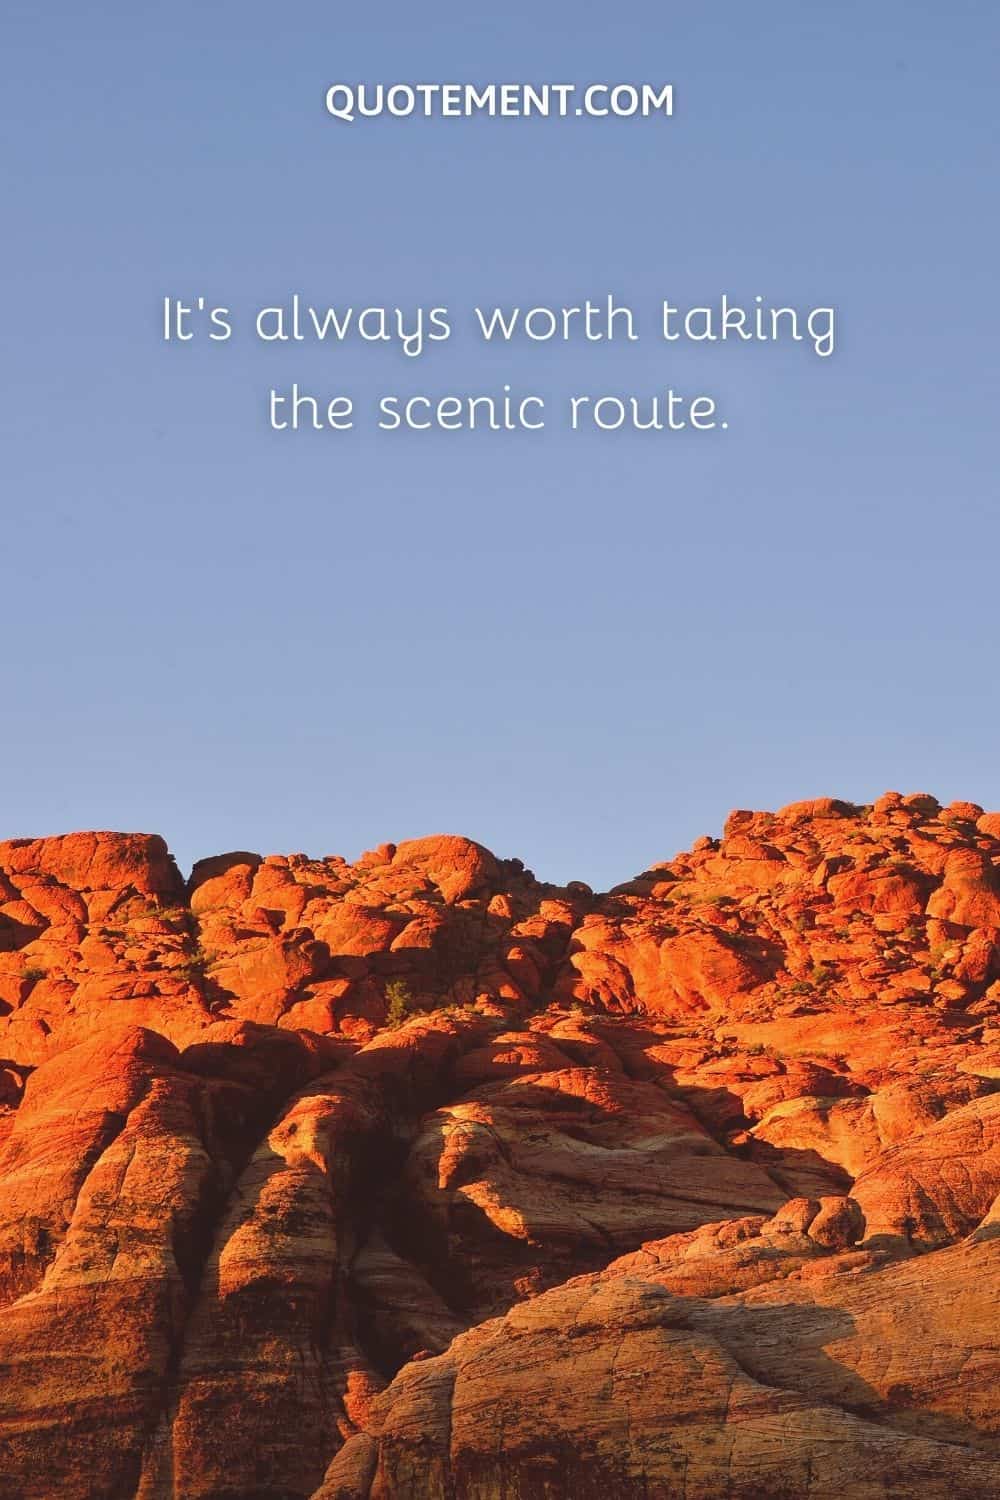 It's always worth taking the scenic route.